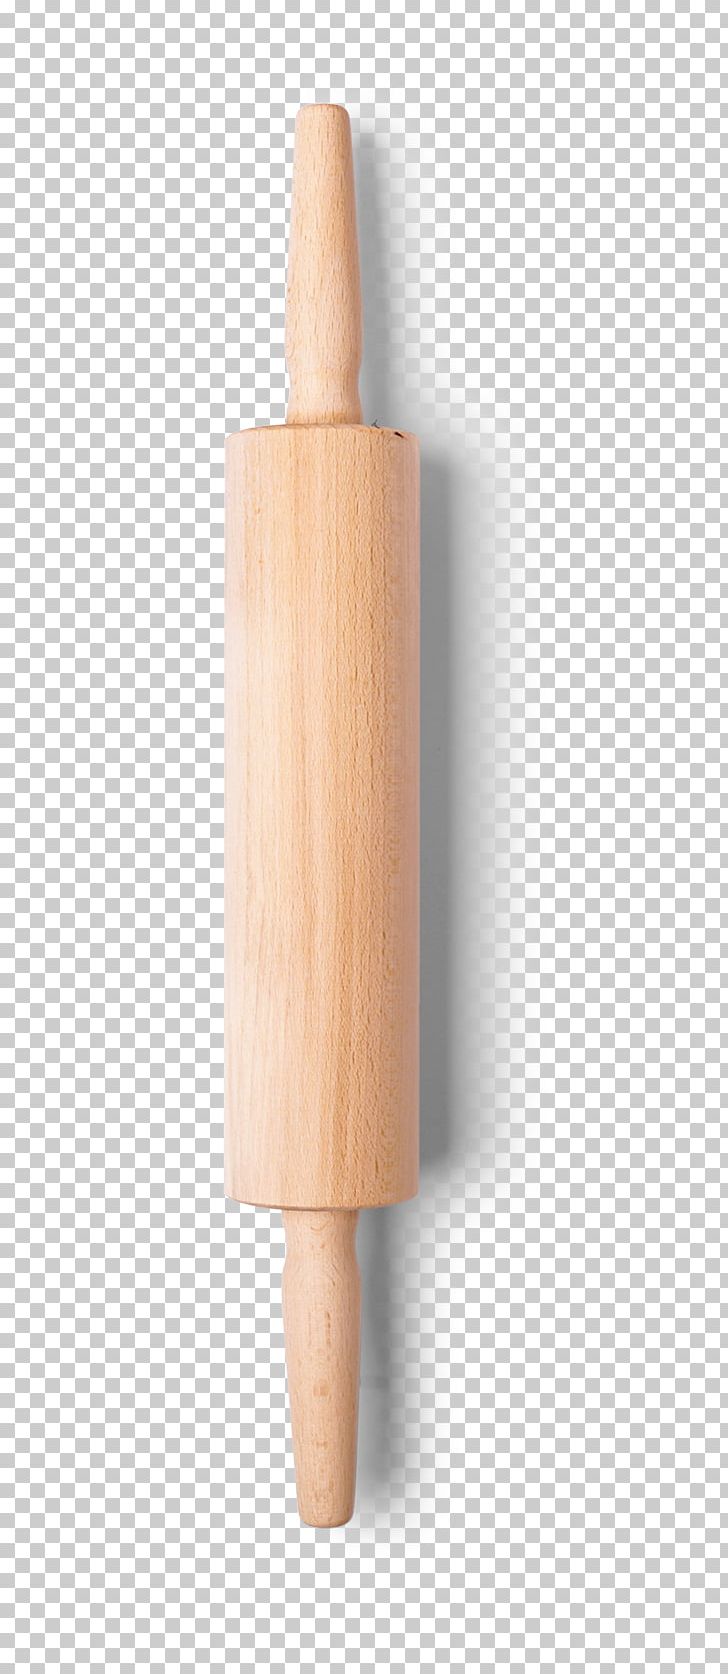 Wood Rolling Pin Kitchen Utensil PNG, Clipart, Chef, Cylinder, Download, Eat, Kitchen Free PNG Download